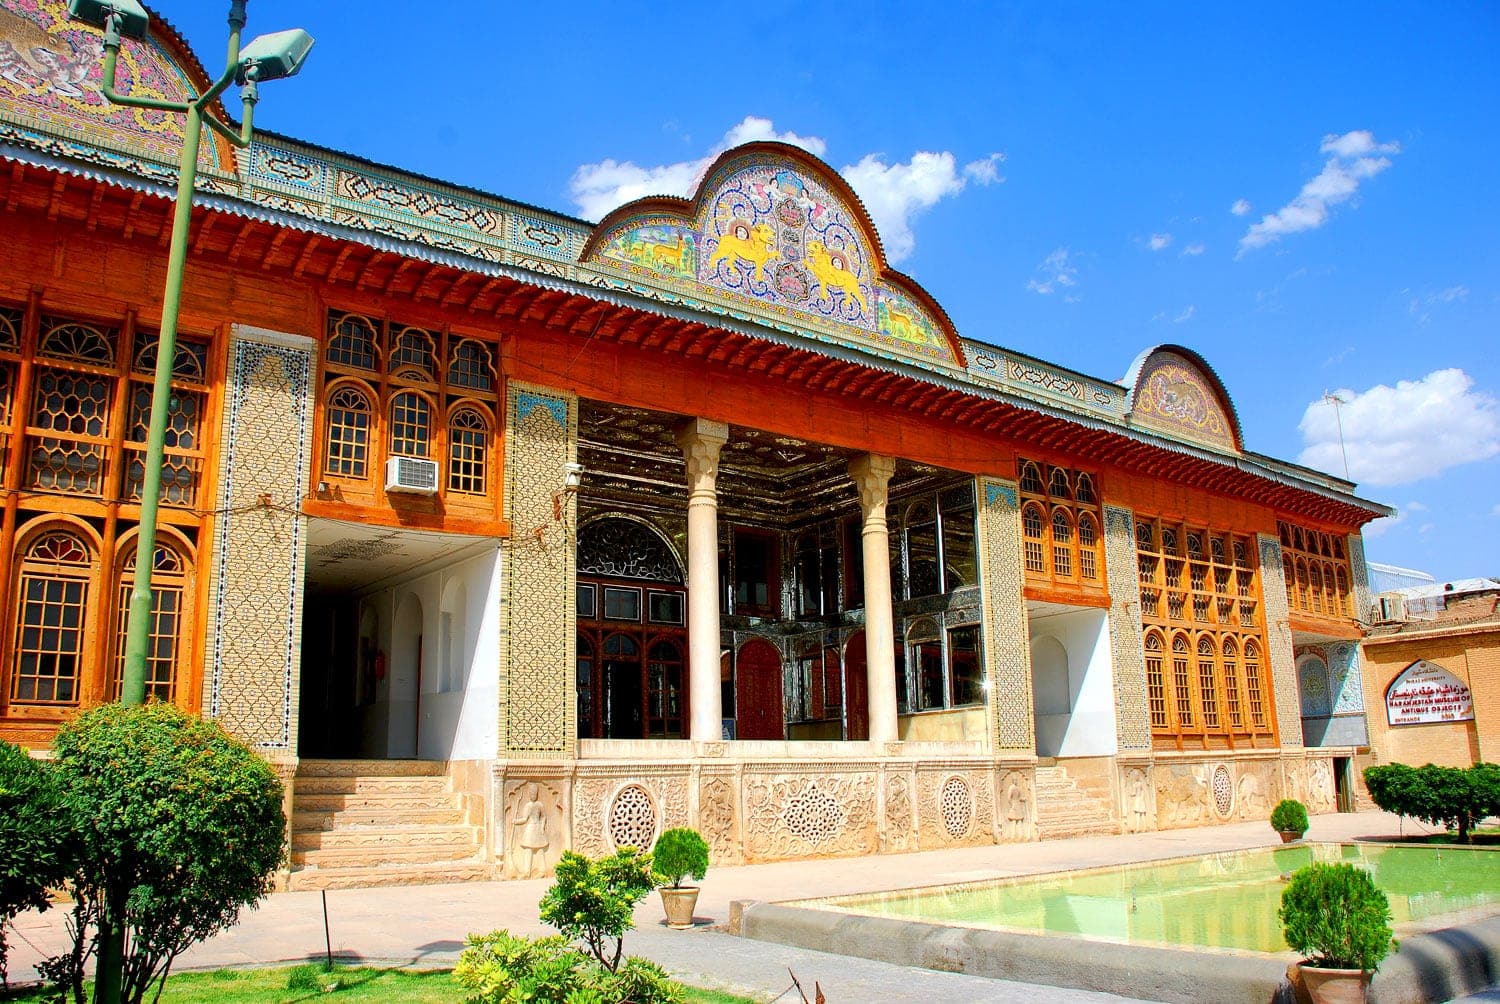 Qavam House Is A Traditional And Historical House In Shiraz, Iran.